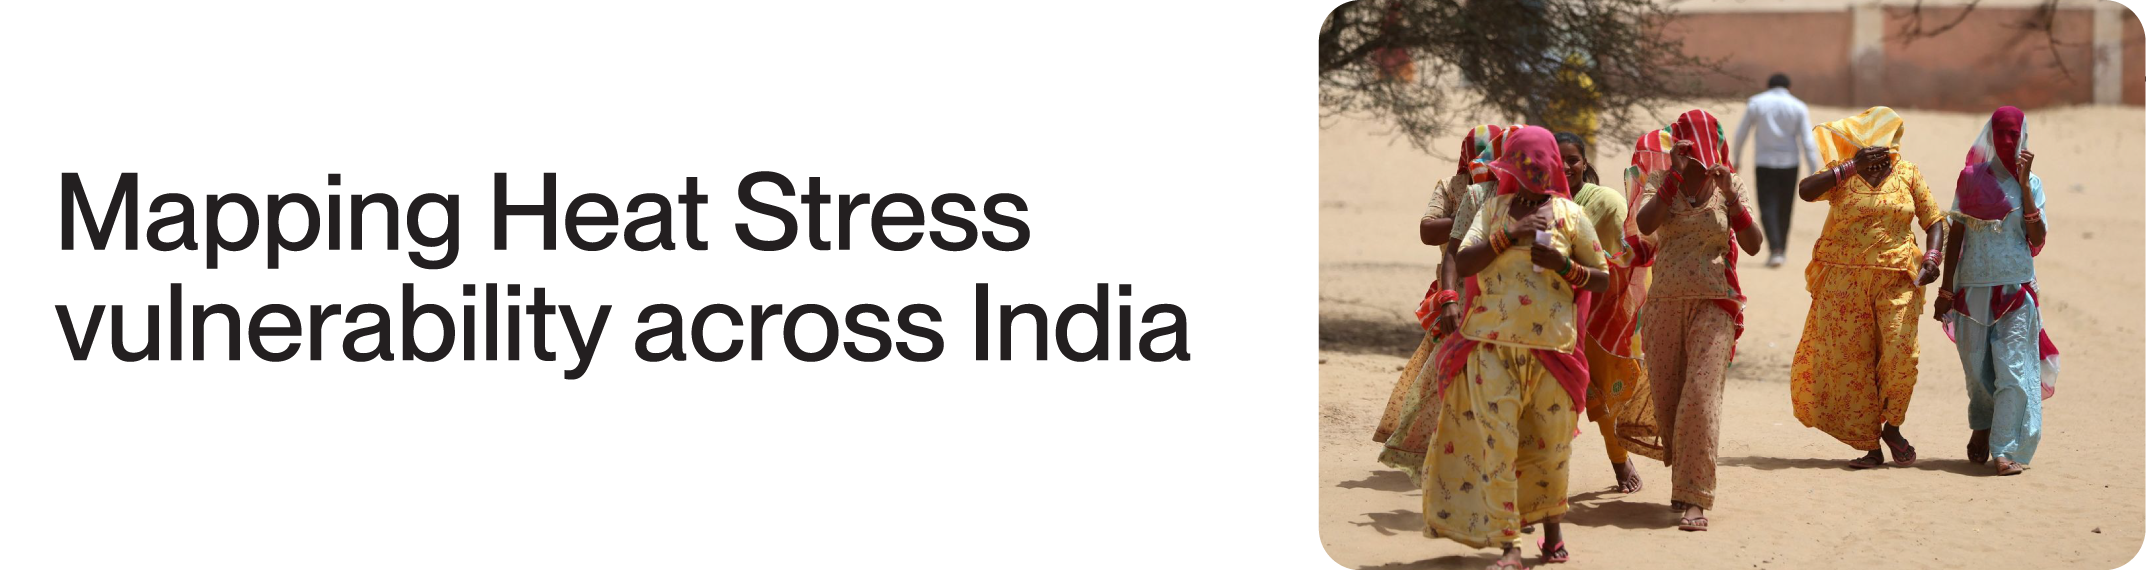 a photo of India women walking over a sandy area in extreme heat. a Headline reads Mapping Heat Stress vulnerability across India